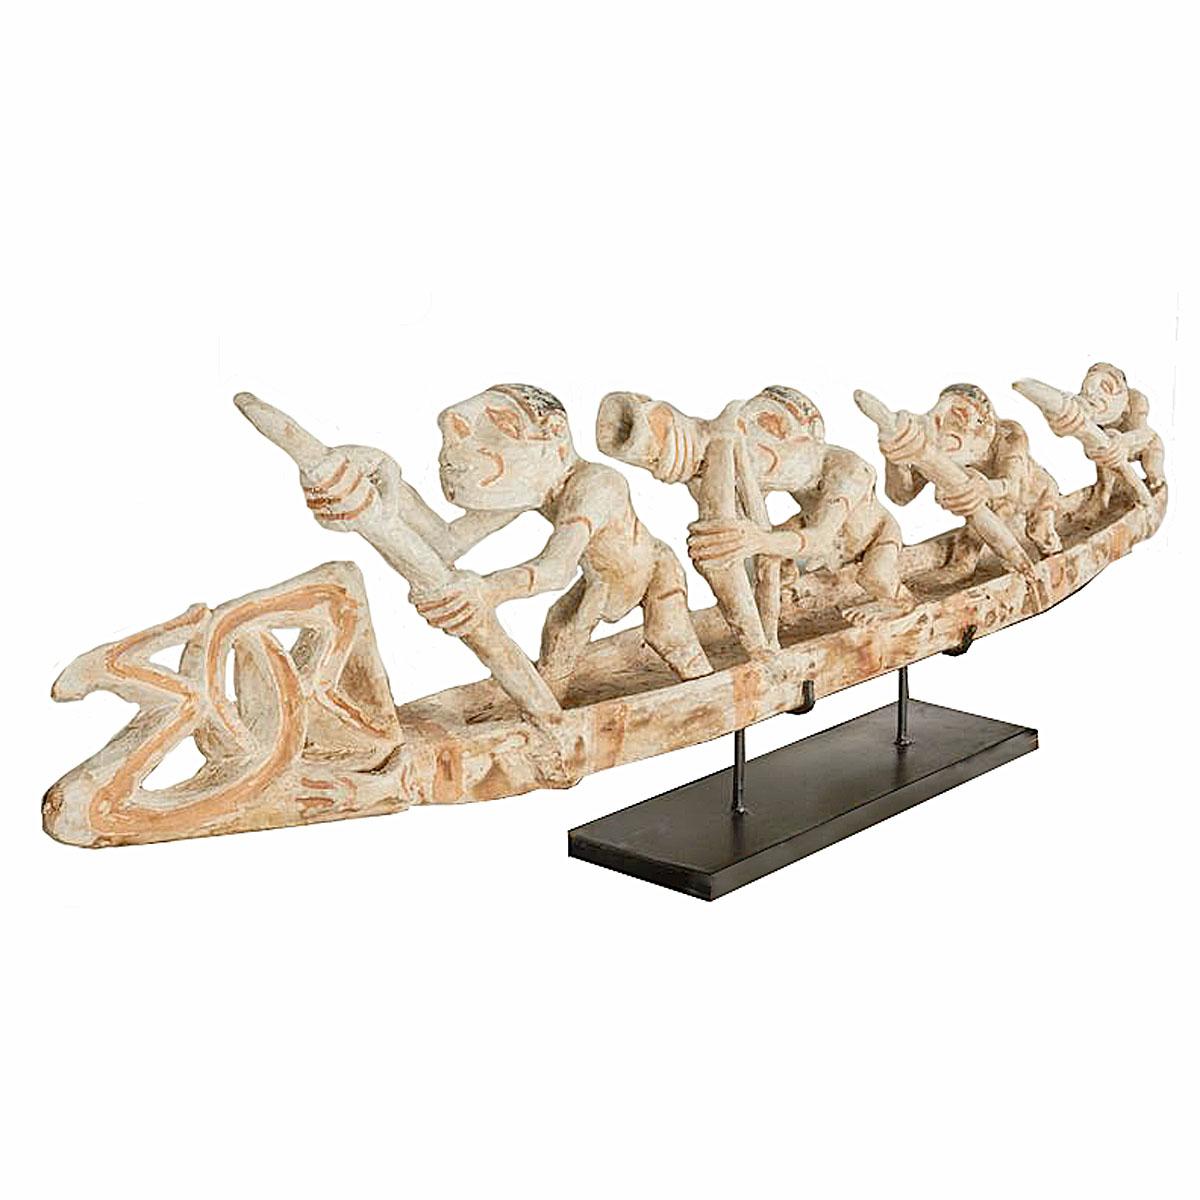 Contemporary Carved Wood Sculpture with Native Crew from Indonesia